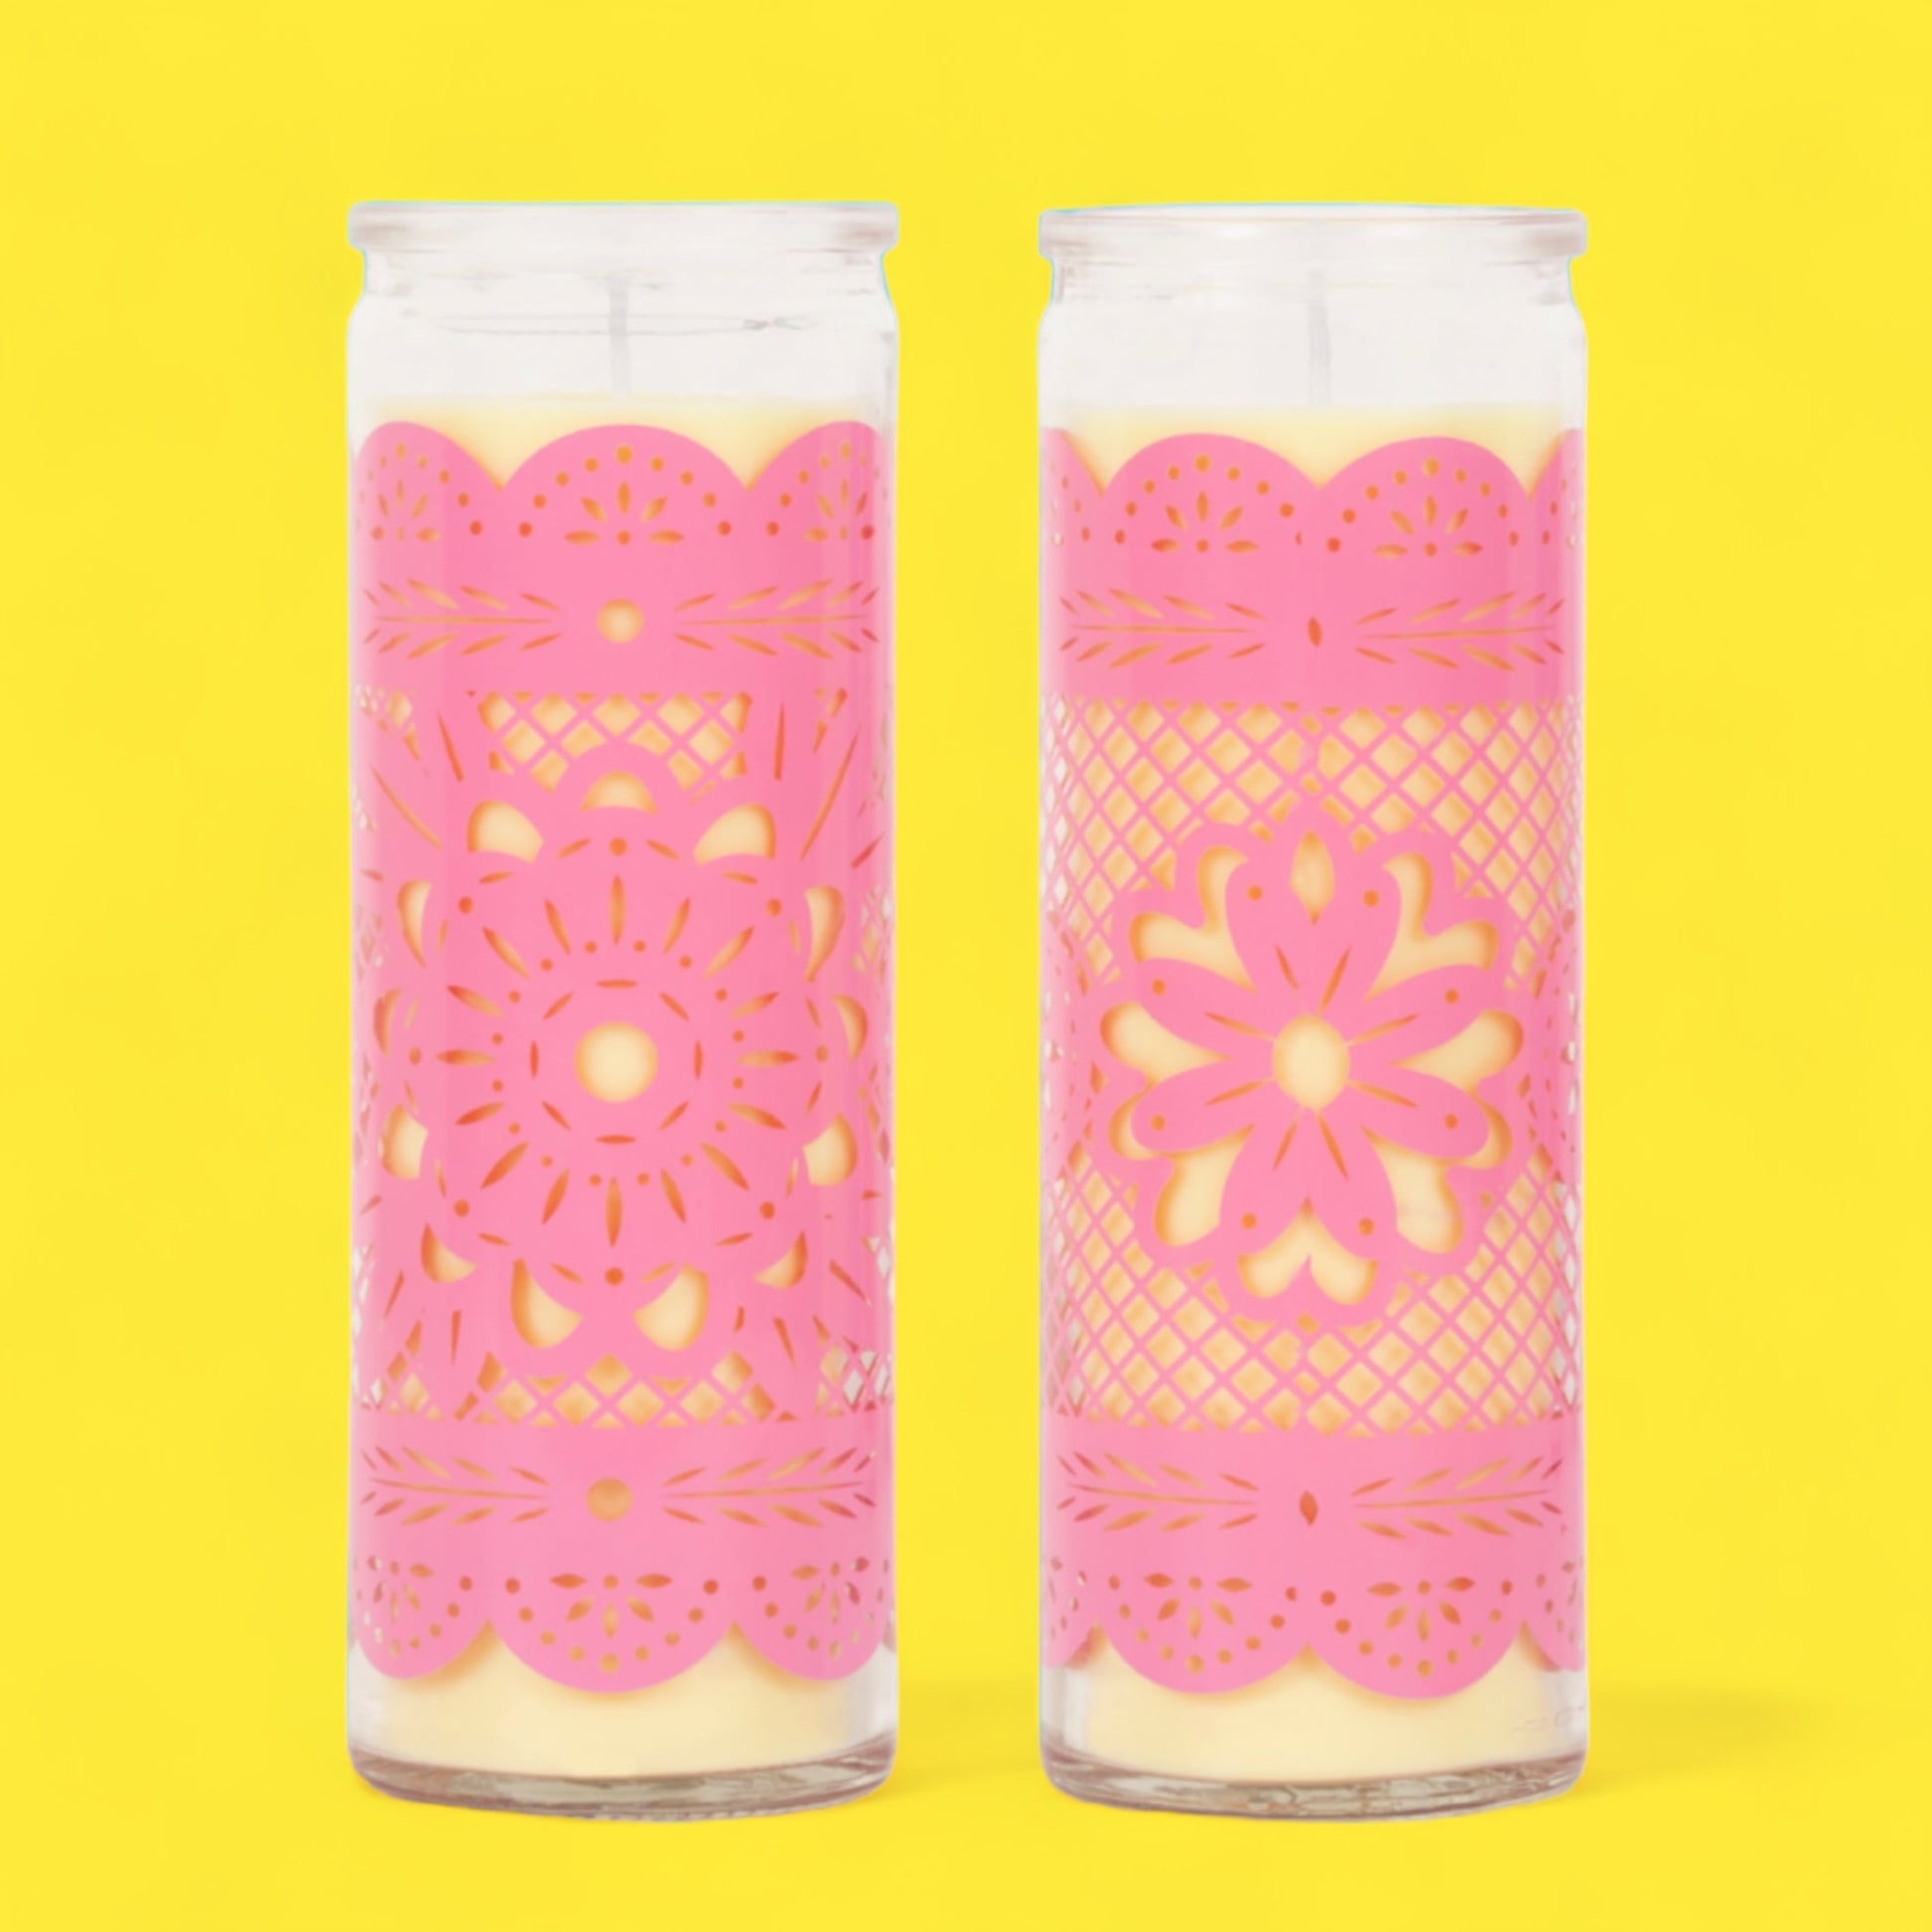 Flor Papel Picado Candle in Glass - Hella Kitsch